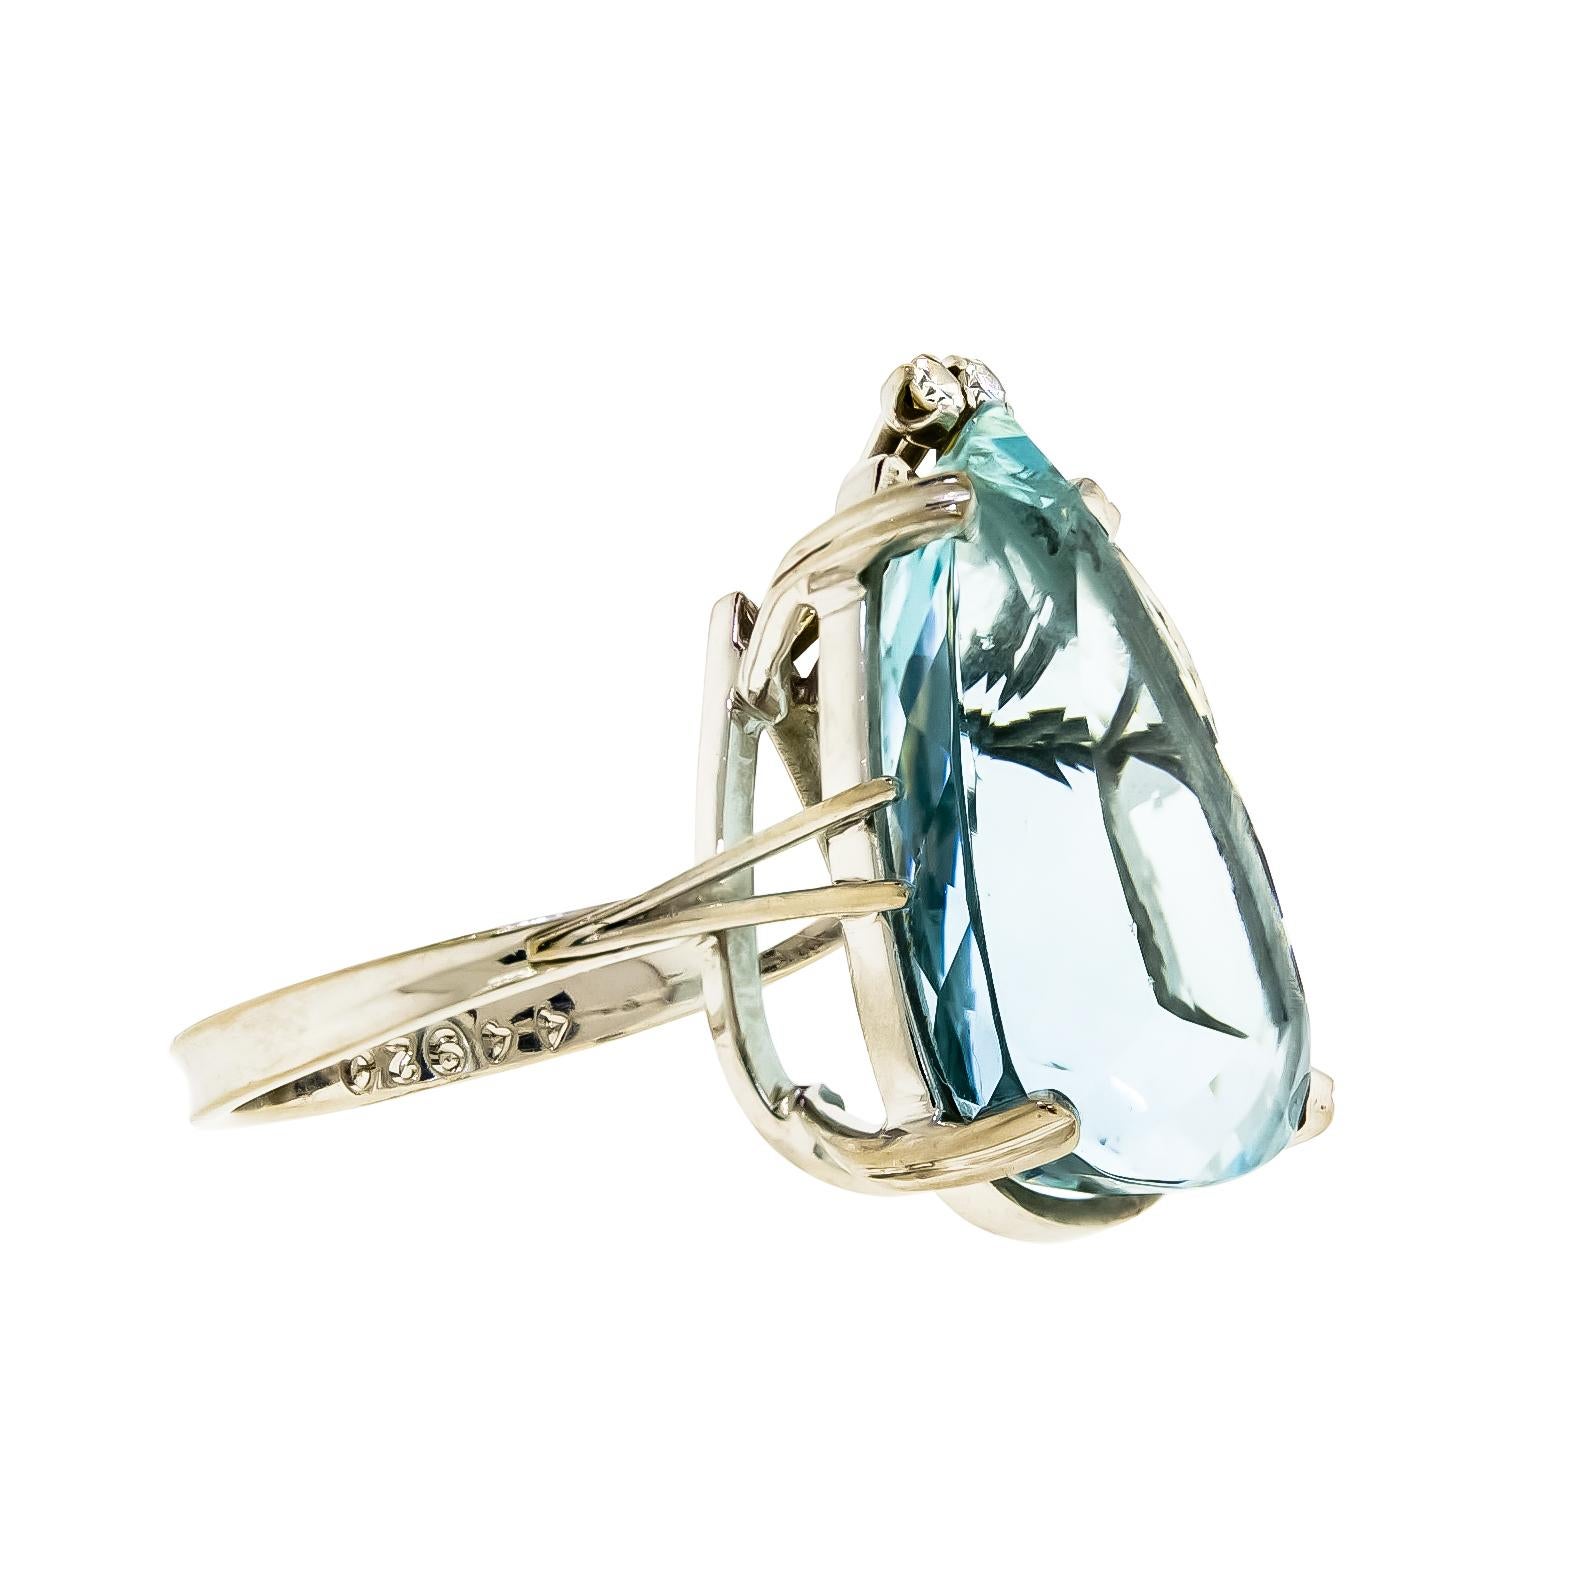 This large yet elegant mid-century aquamarine and the diamond cocktail ring will draw attention. The beautiful crystal blue hue that radiates from the impressive pear-shaped aquamarine pair perfectly with the subtle glow of the 18 karat white gold